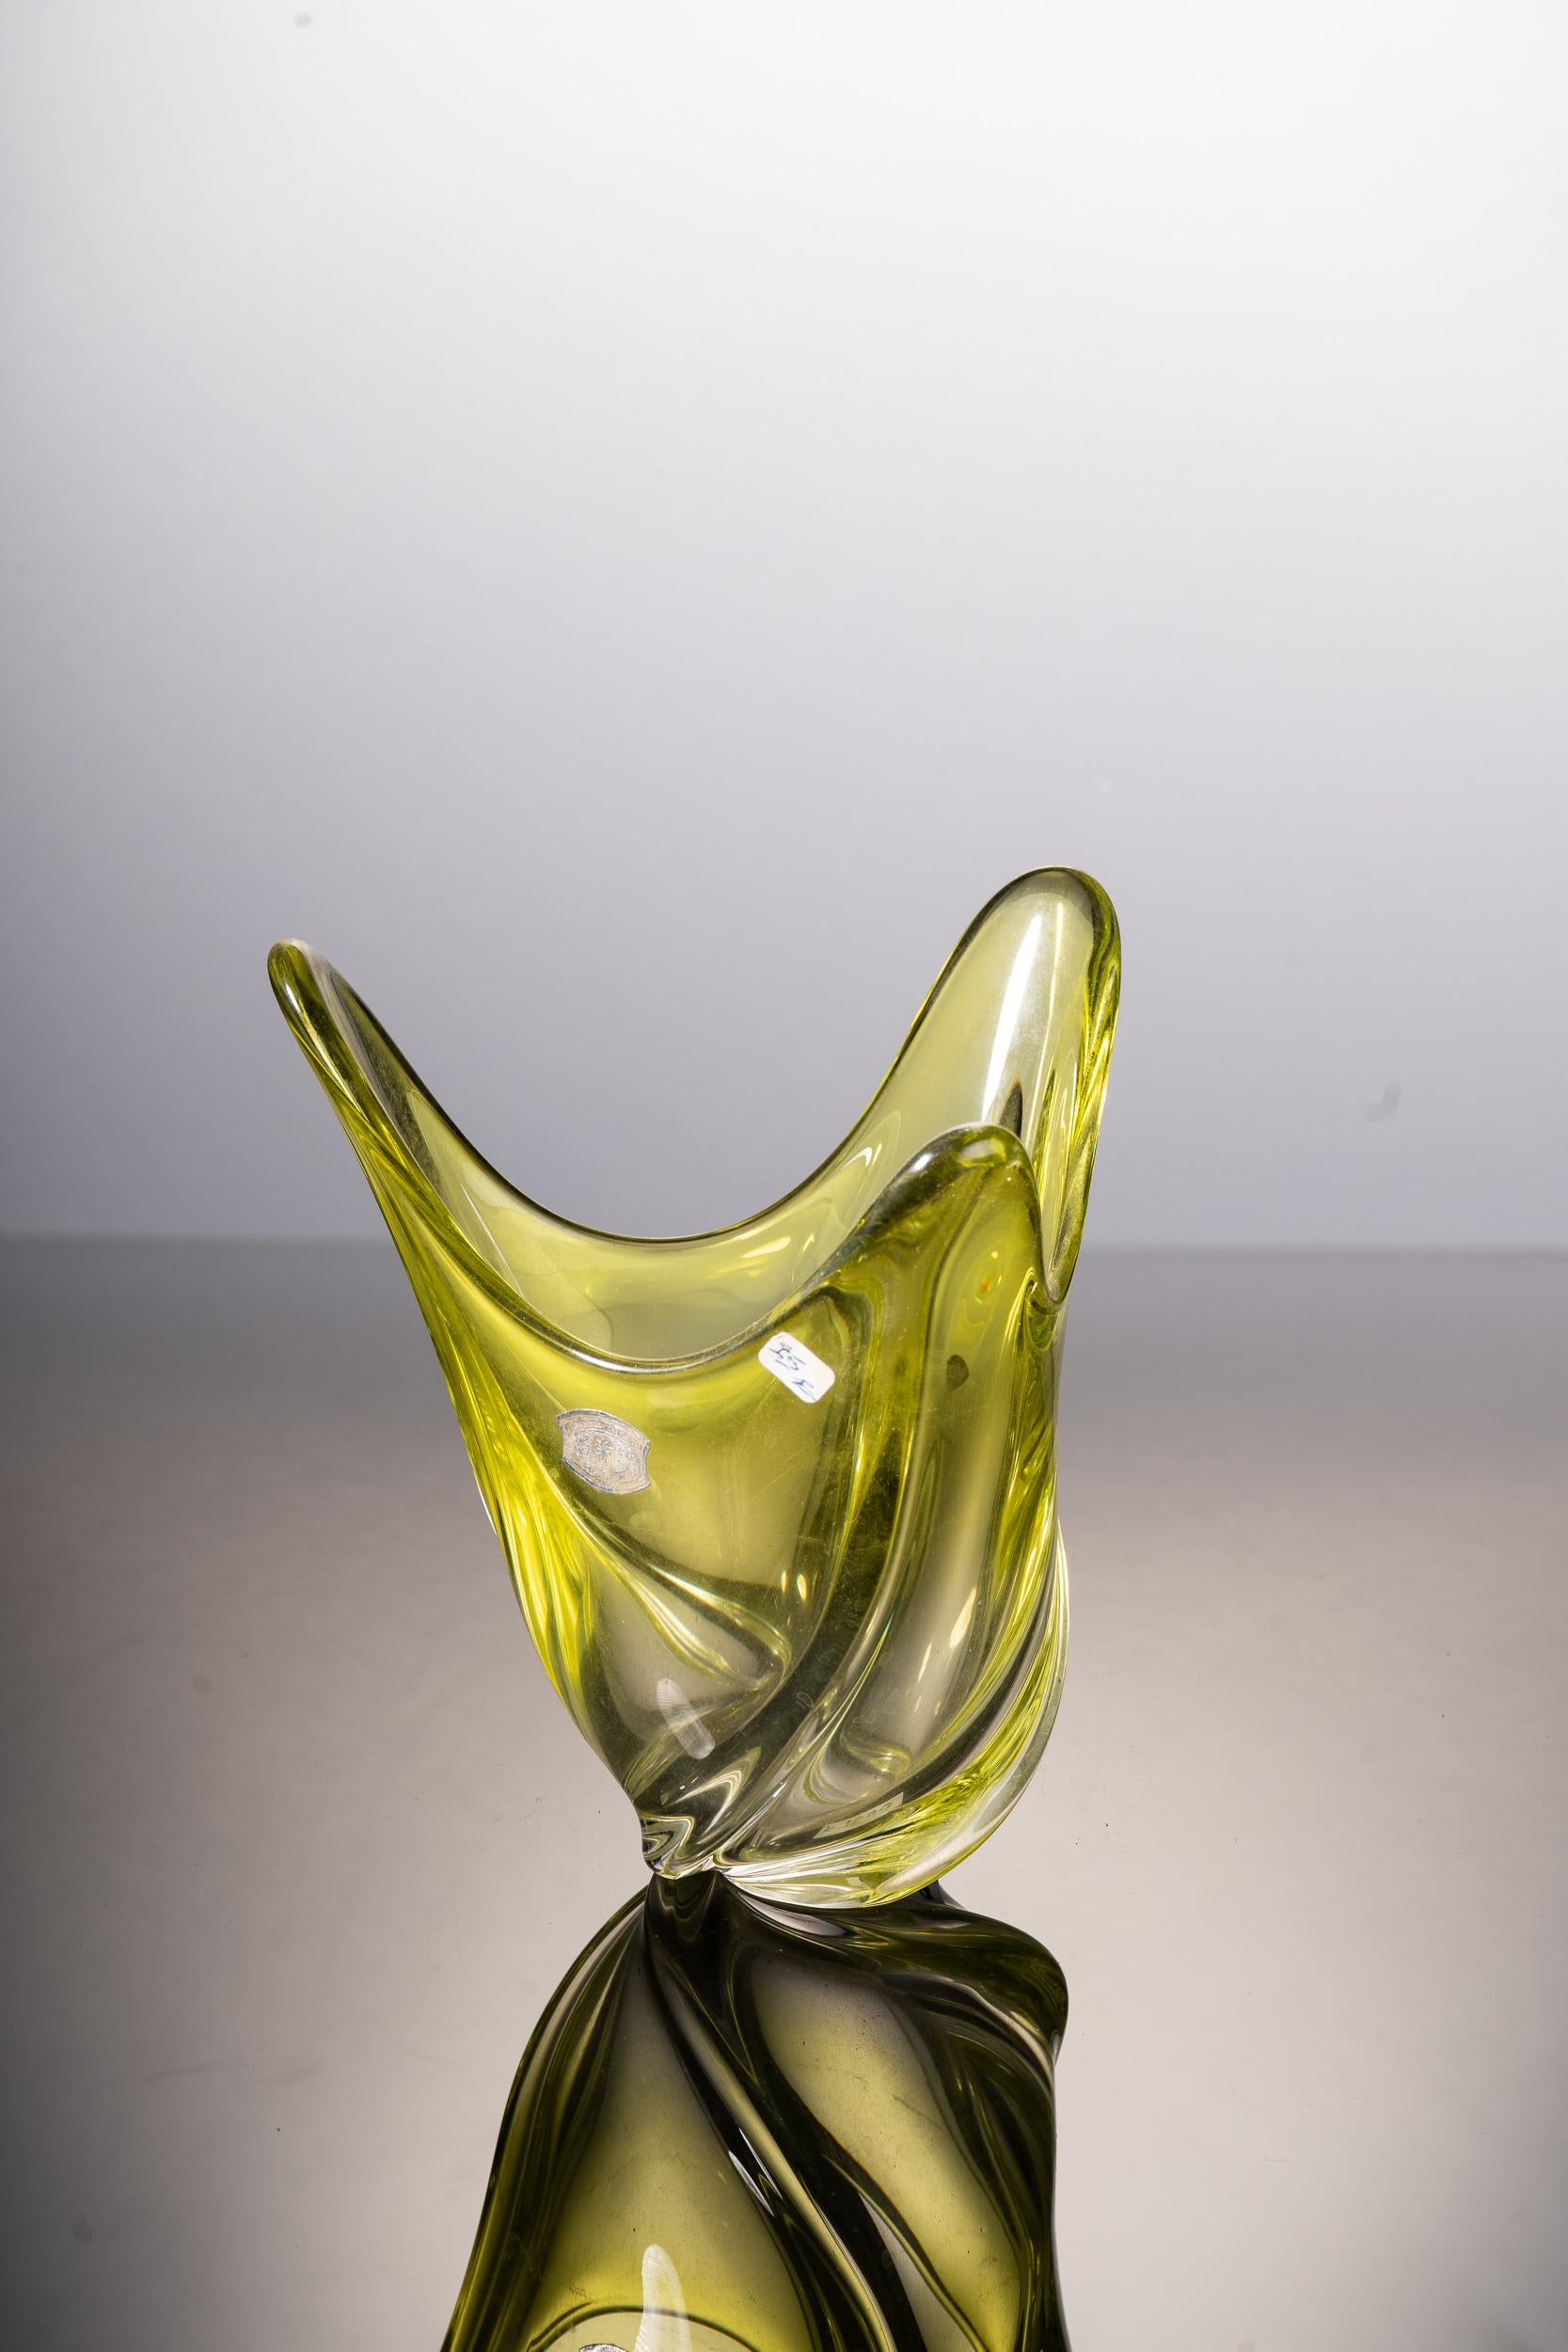 Strikingly elegant hand blown yellow and clear glass vase. The base has a twisted design and the top resembles three blooming petals. Mint condition.